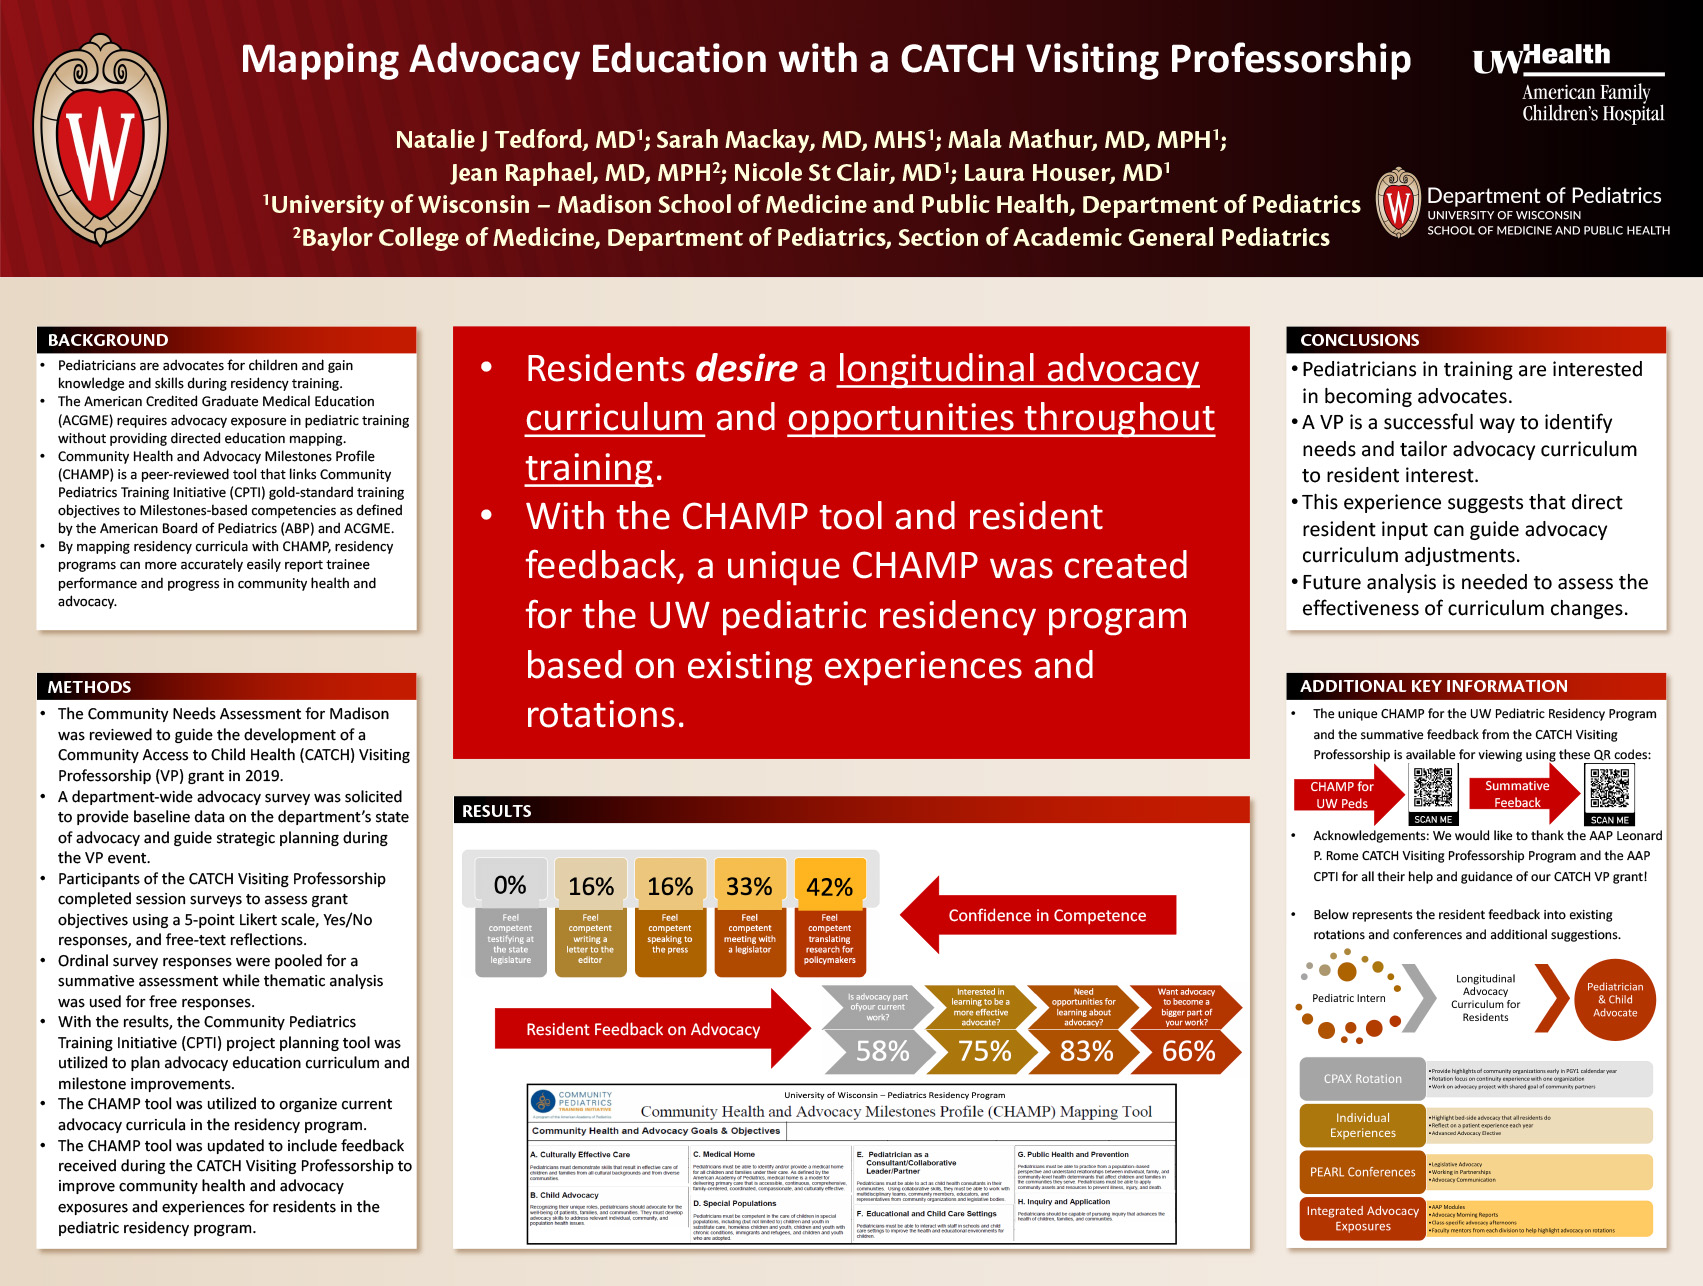 Mapping Advocacy Education with a CATCH Visiting Professorship poster image